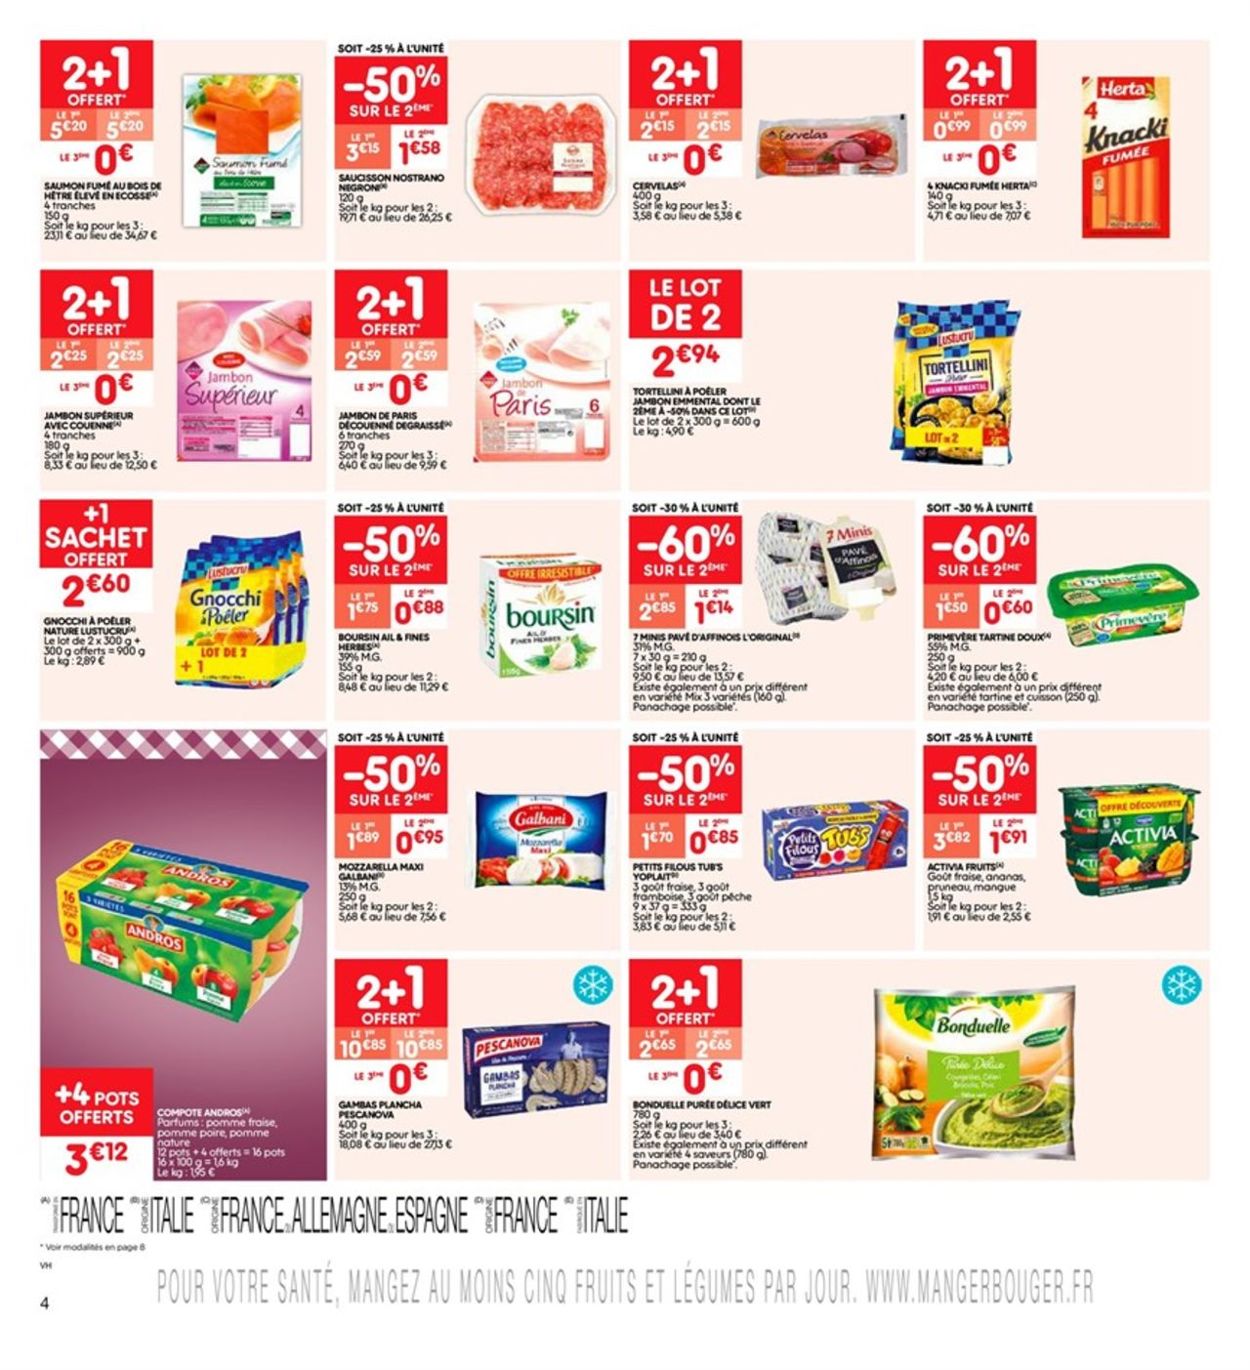 Leader Price Catalogue - 10.09-22.09.2019 (Page 4)